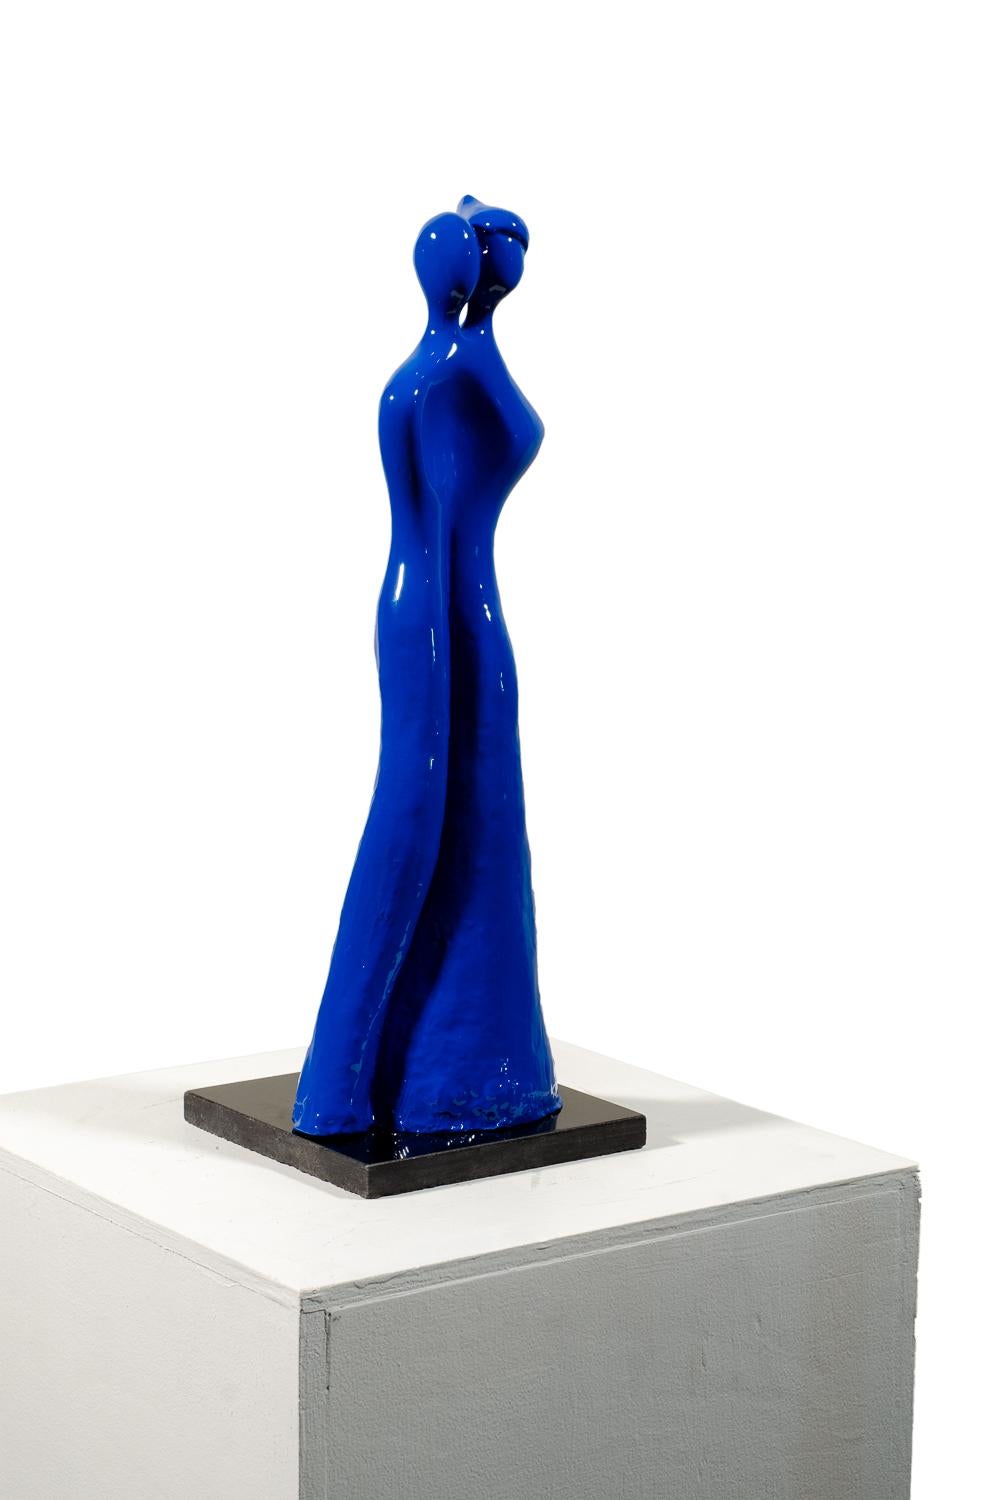 Soul Mates #1 (in blue) When in love, their souls and bodies fuse into just one. - Sculpture by Beatriz Gerenstein